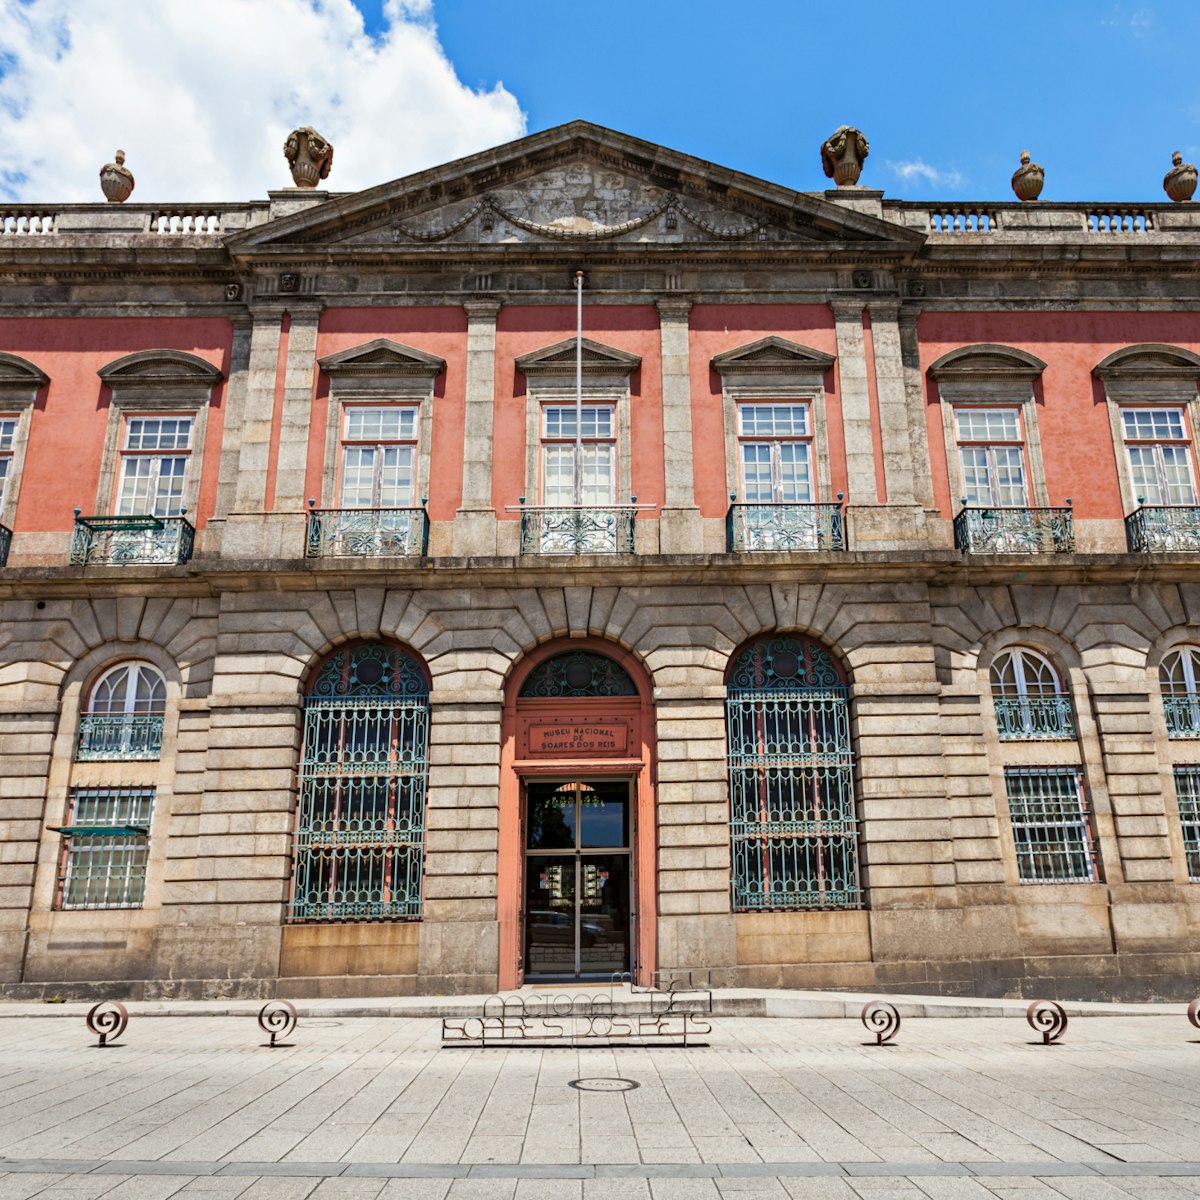 National Museum Soares dos Reis located in the ancient Carrancas Palace, in Porto, Portugal; Shutterstock ID 233117197; Your name (First / Last): Josh Vogel; GL account no.: 56530; Netsuite department name: Online Design; Full Product or Project name including edition: Digital Content/Sights